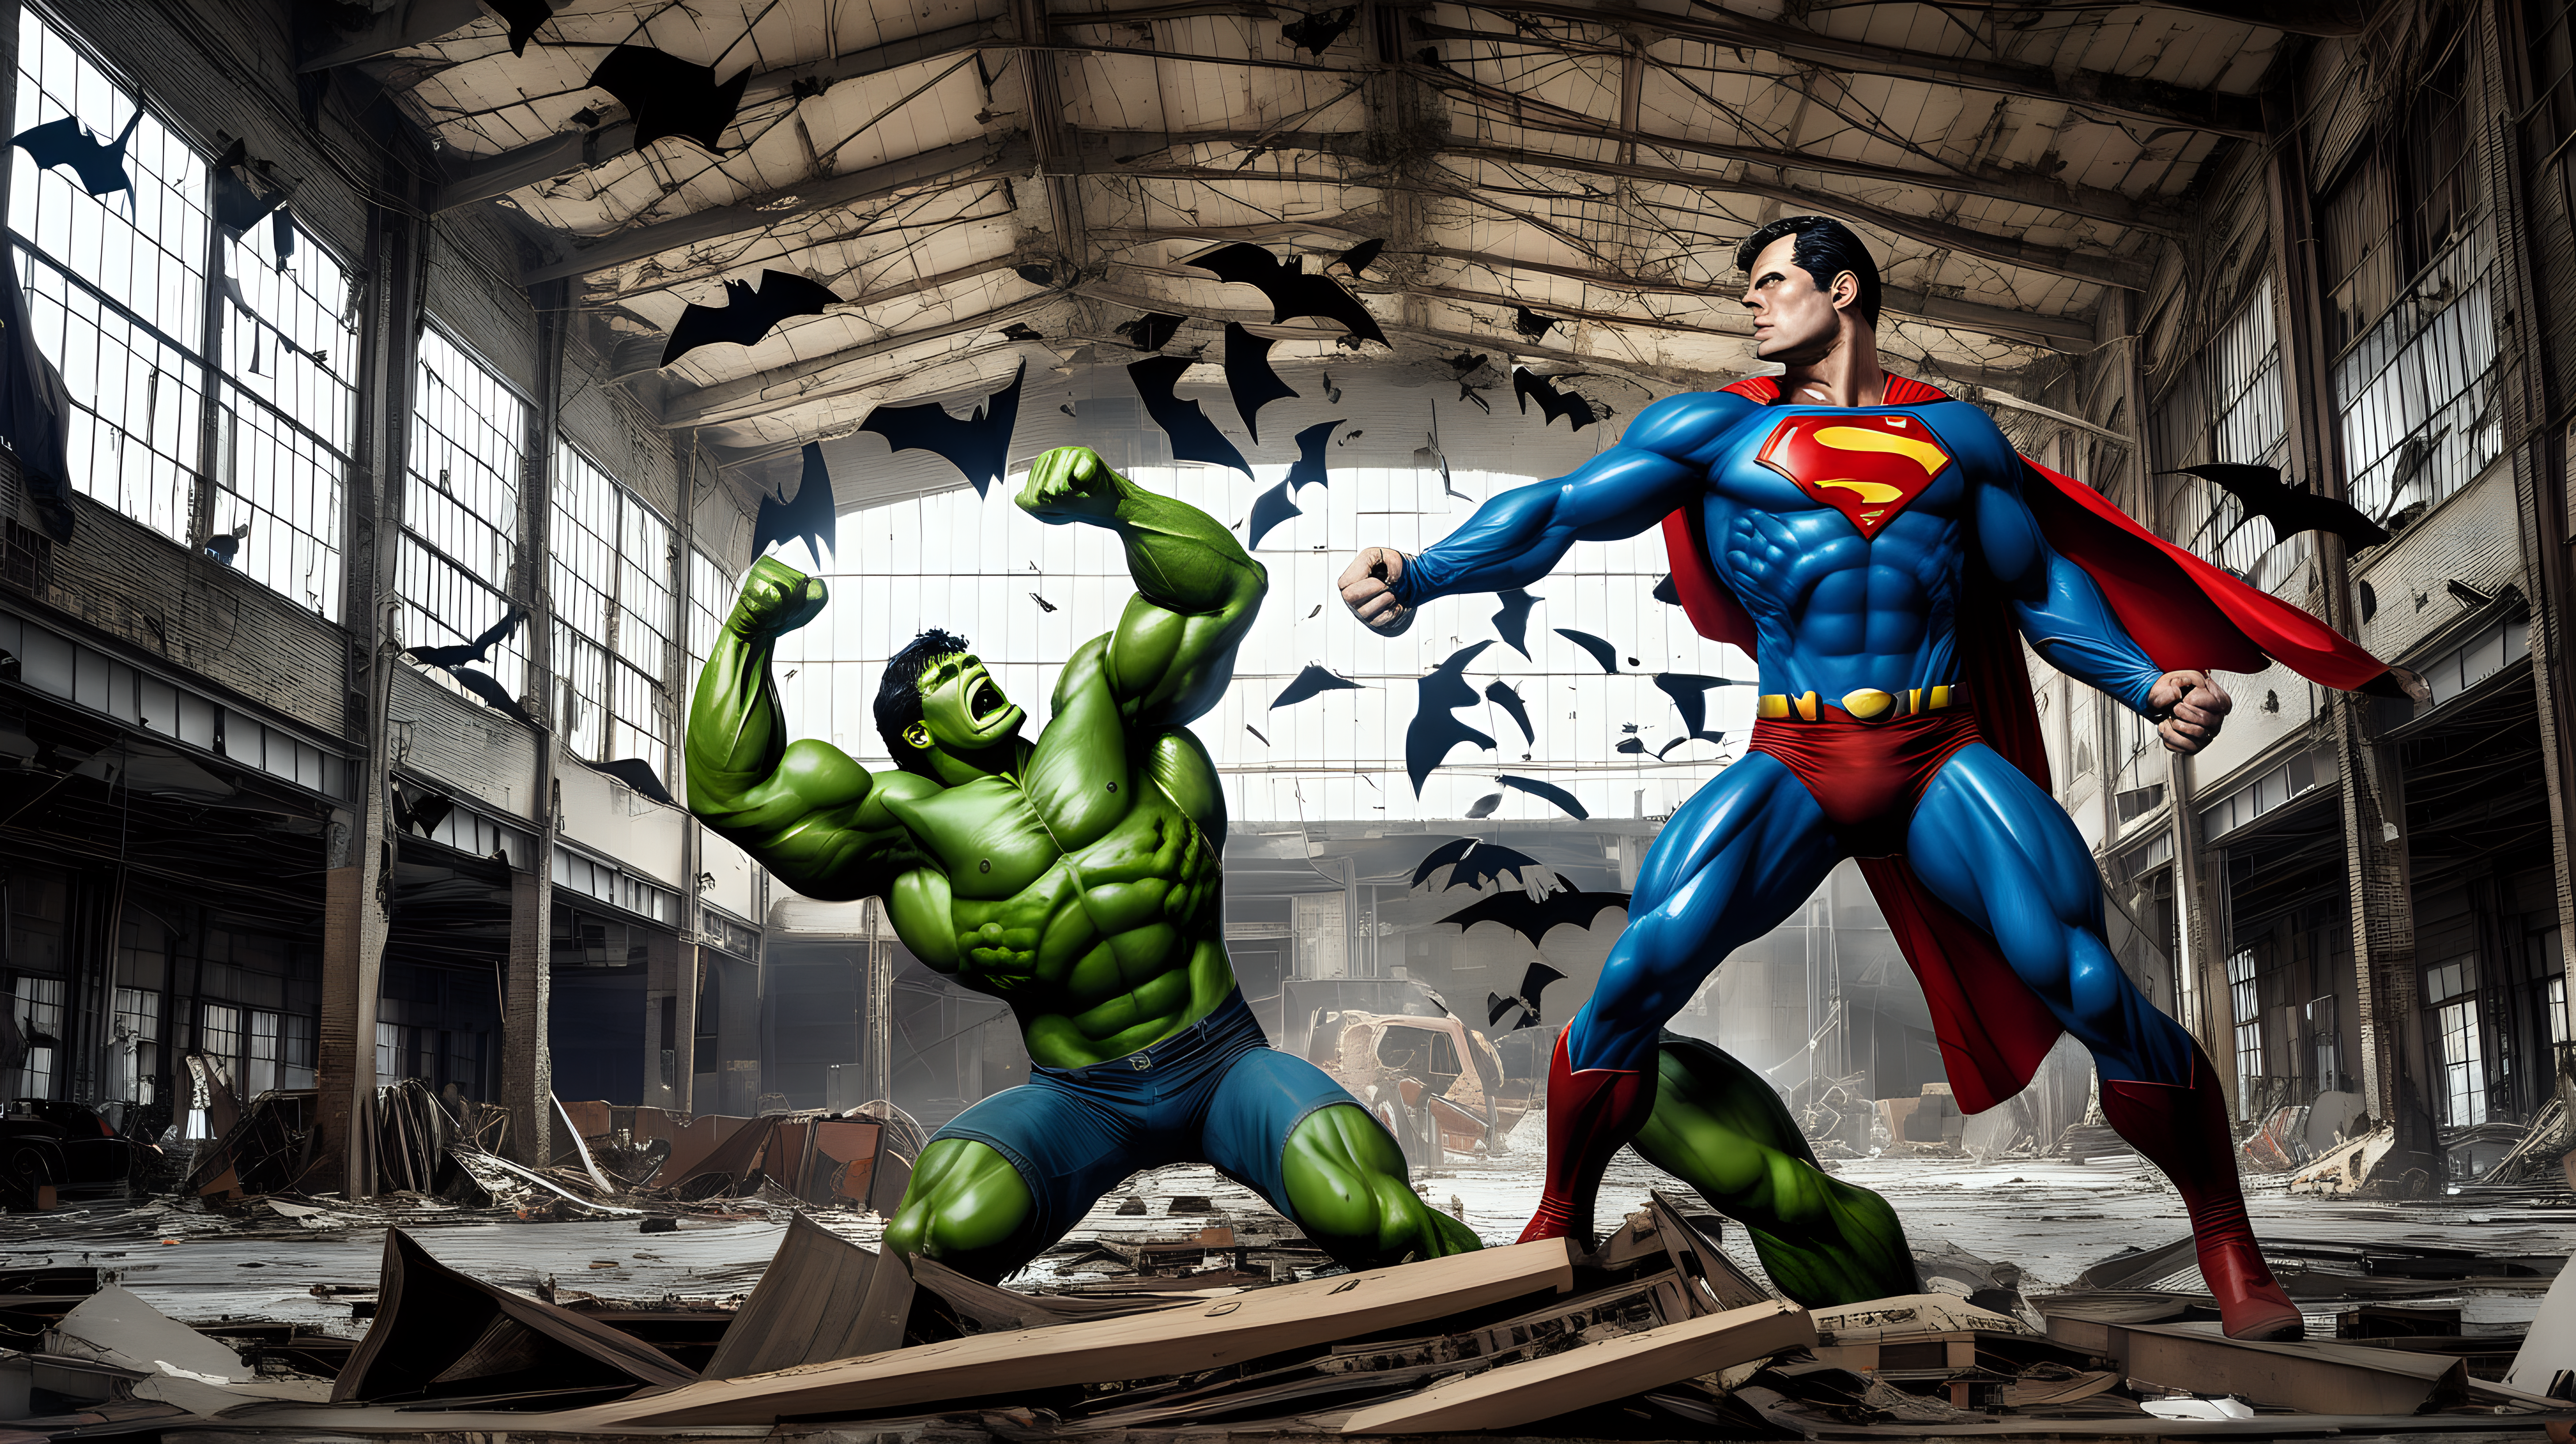 Superman fights the hulk in an abandoned guitar